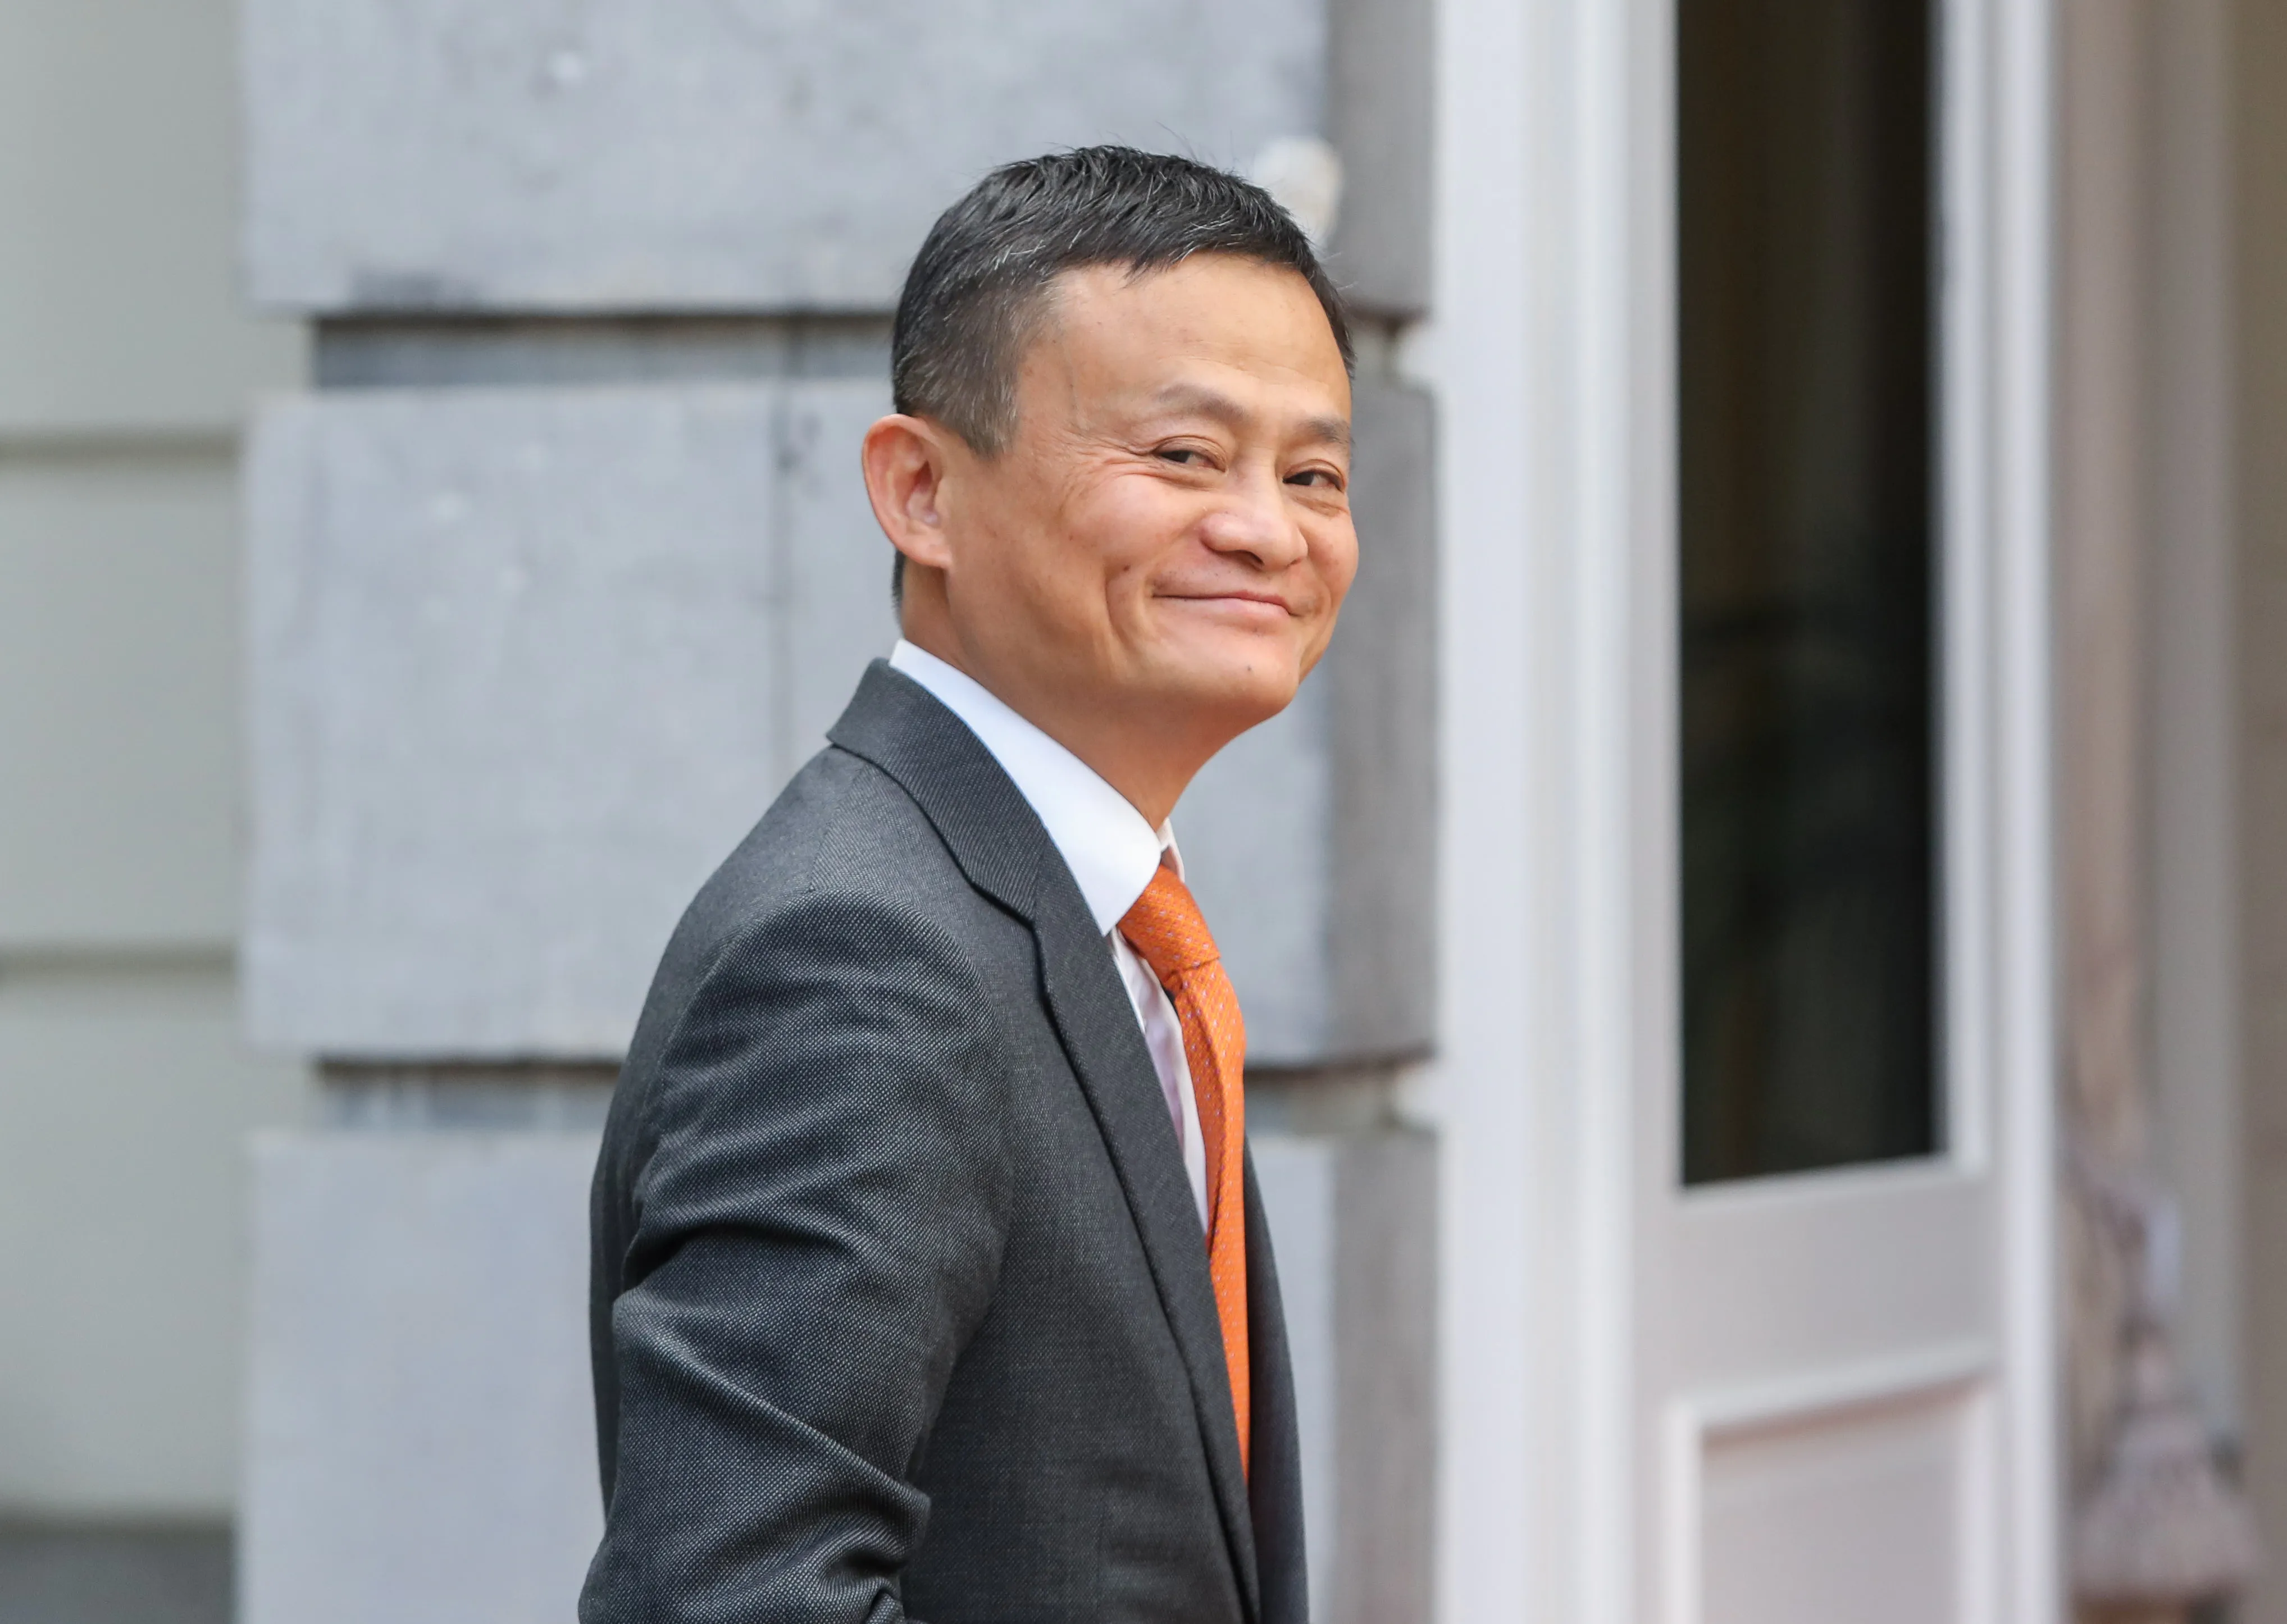 Jack Ma Is Quitting His $420 Billion Company to Become a Teacher. Here’s Everything to Know About China’s Richest Man